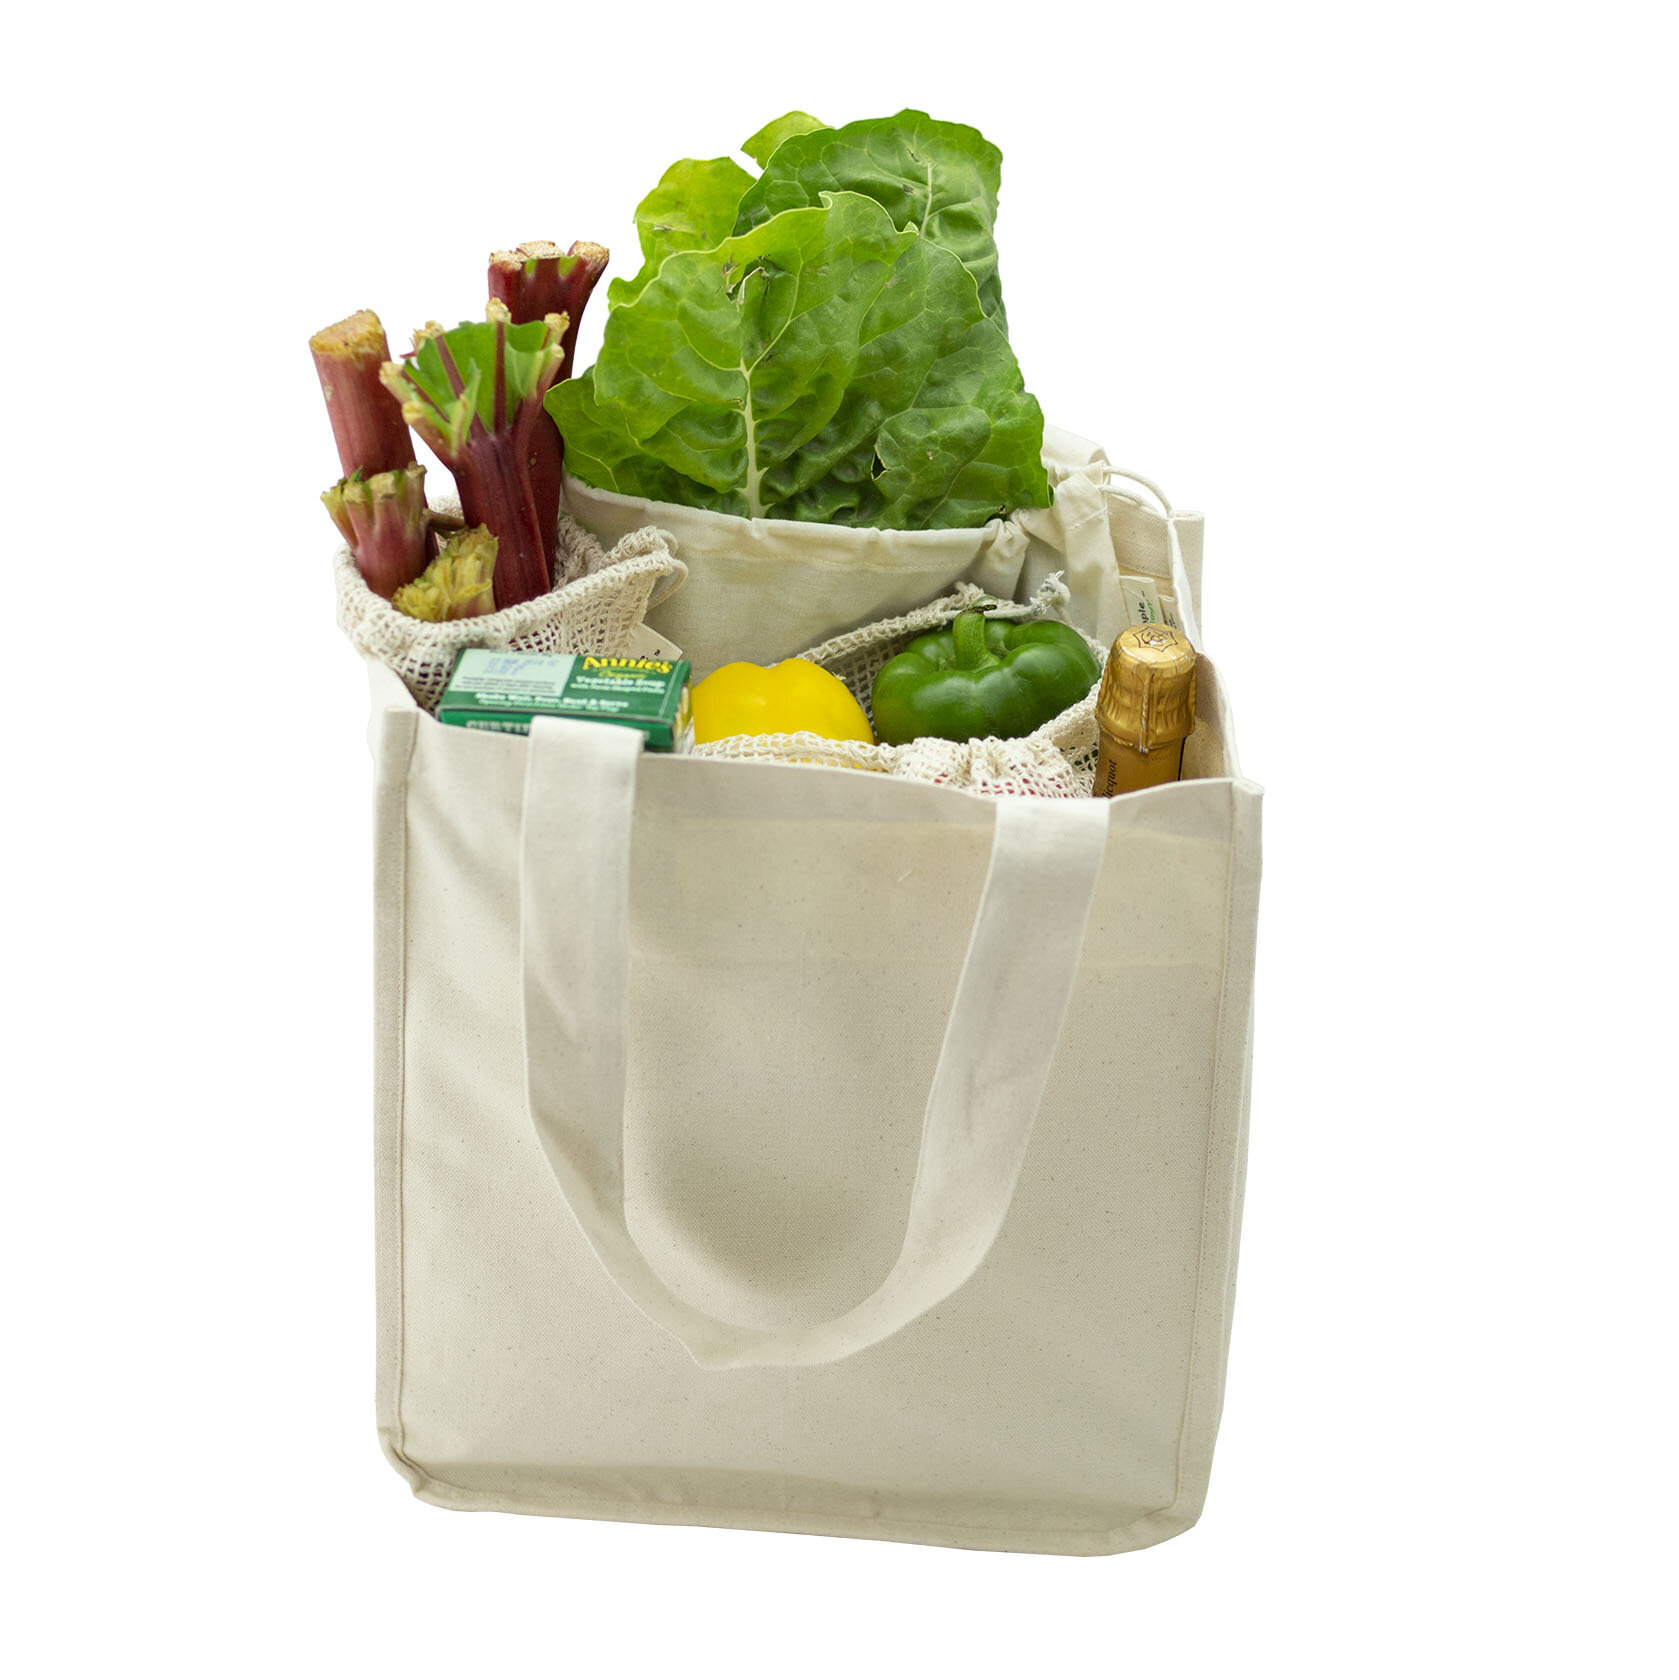 Medium Details about   Organic RealBar Shopping Produce Bags Reusable Grocery Bags 